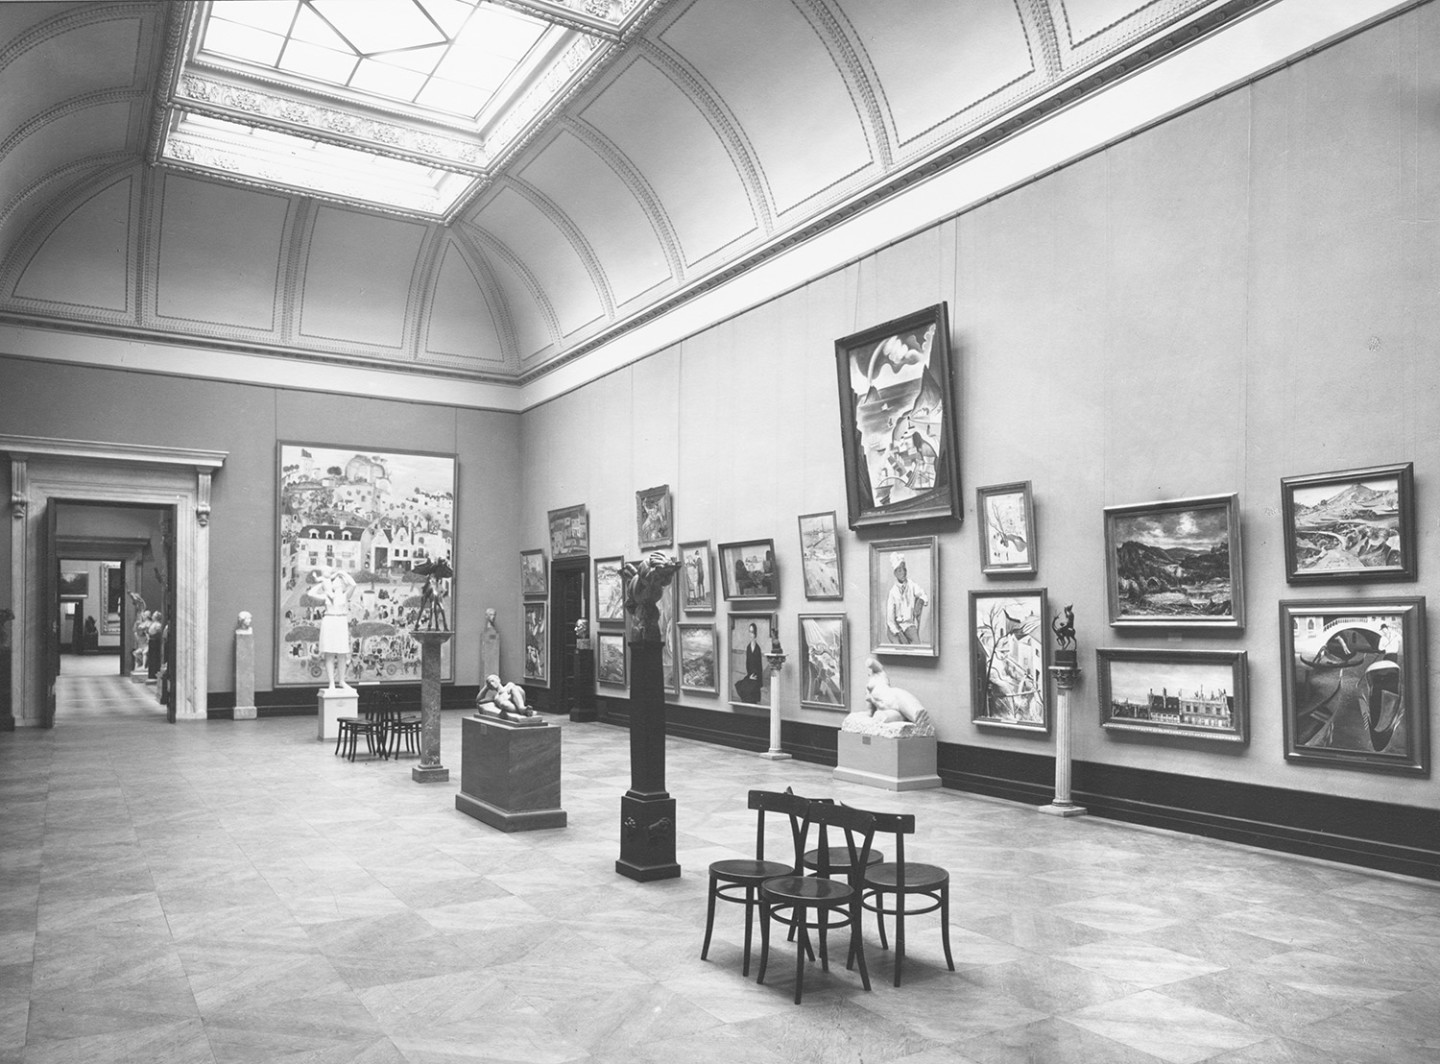 Interior of gallery at Nationalmuseum.